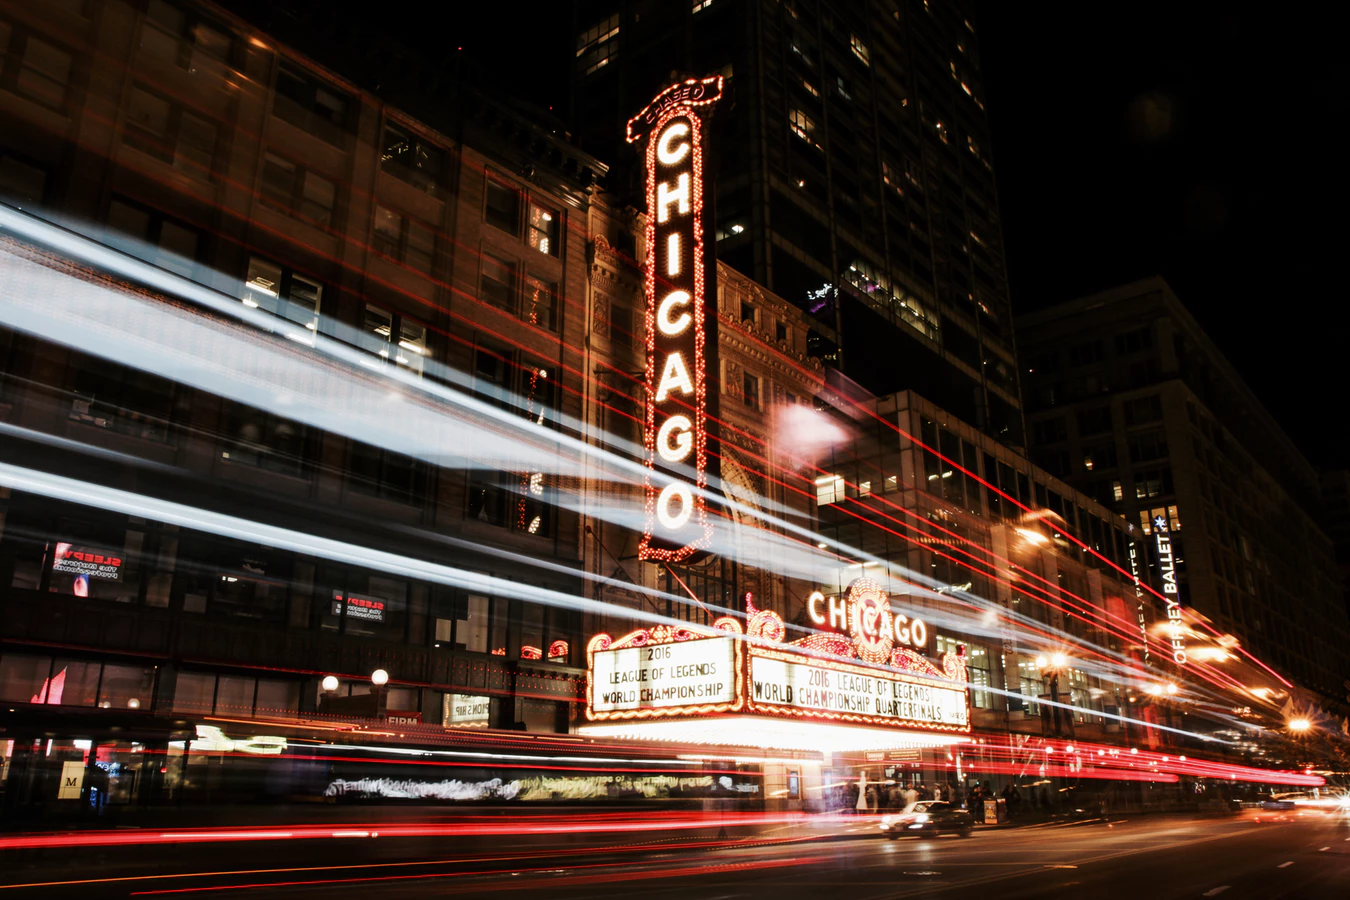 Things to do in Chicago at night As impressive as Chicago is in the light of day, the city is more exquisite at night